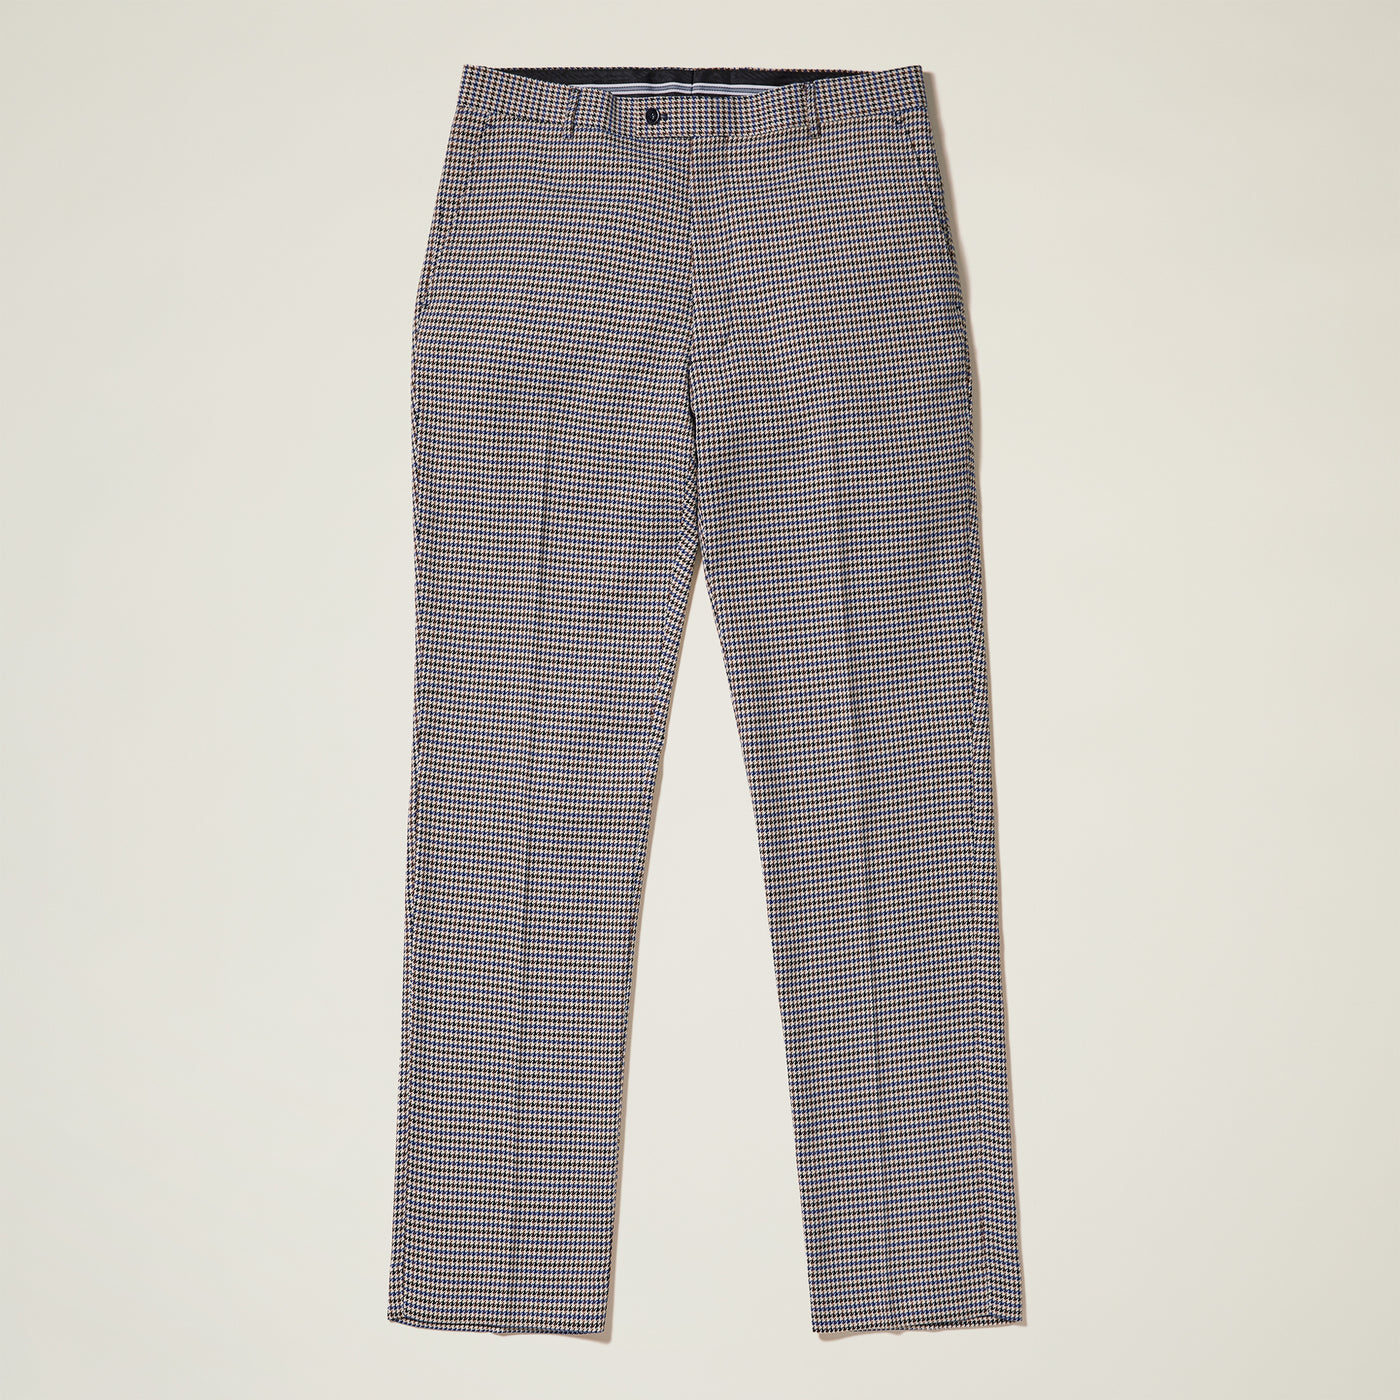 Houndstooth Pattern Pant - INSERCH